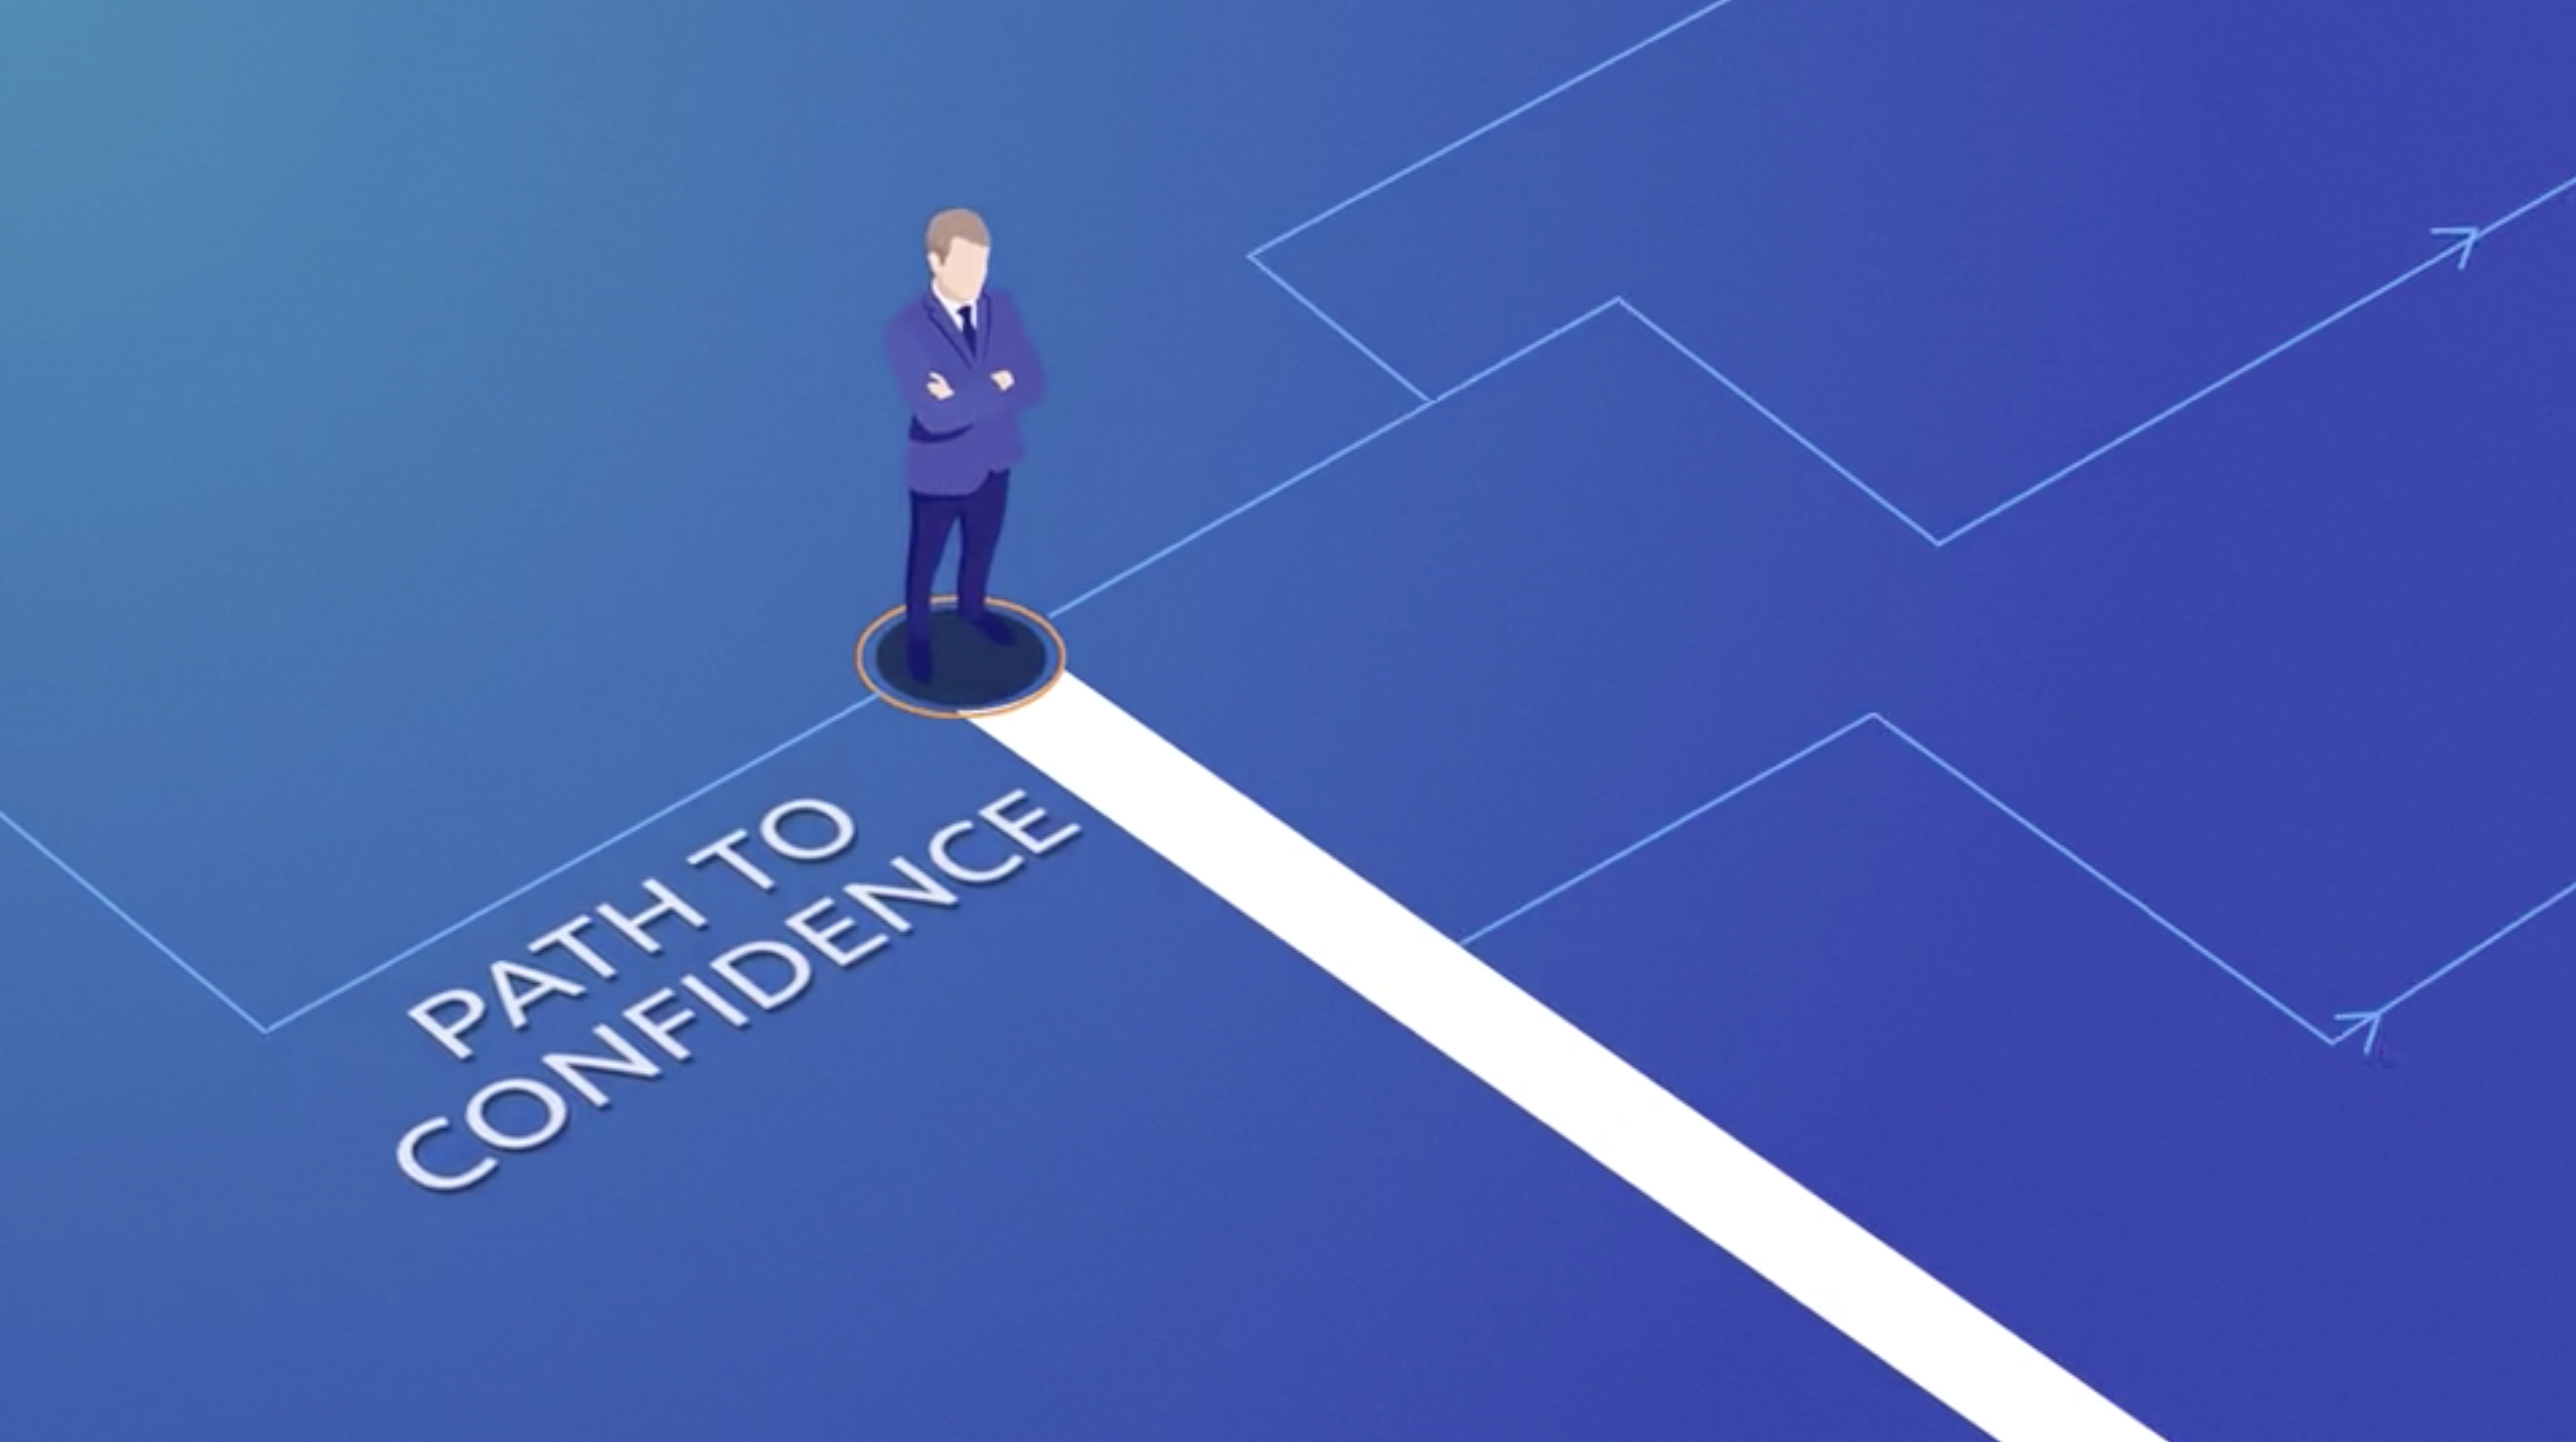 The Path to Confidence: BitSight for Third-Party Risk Management